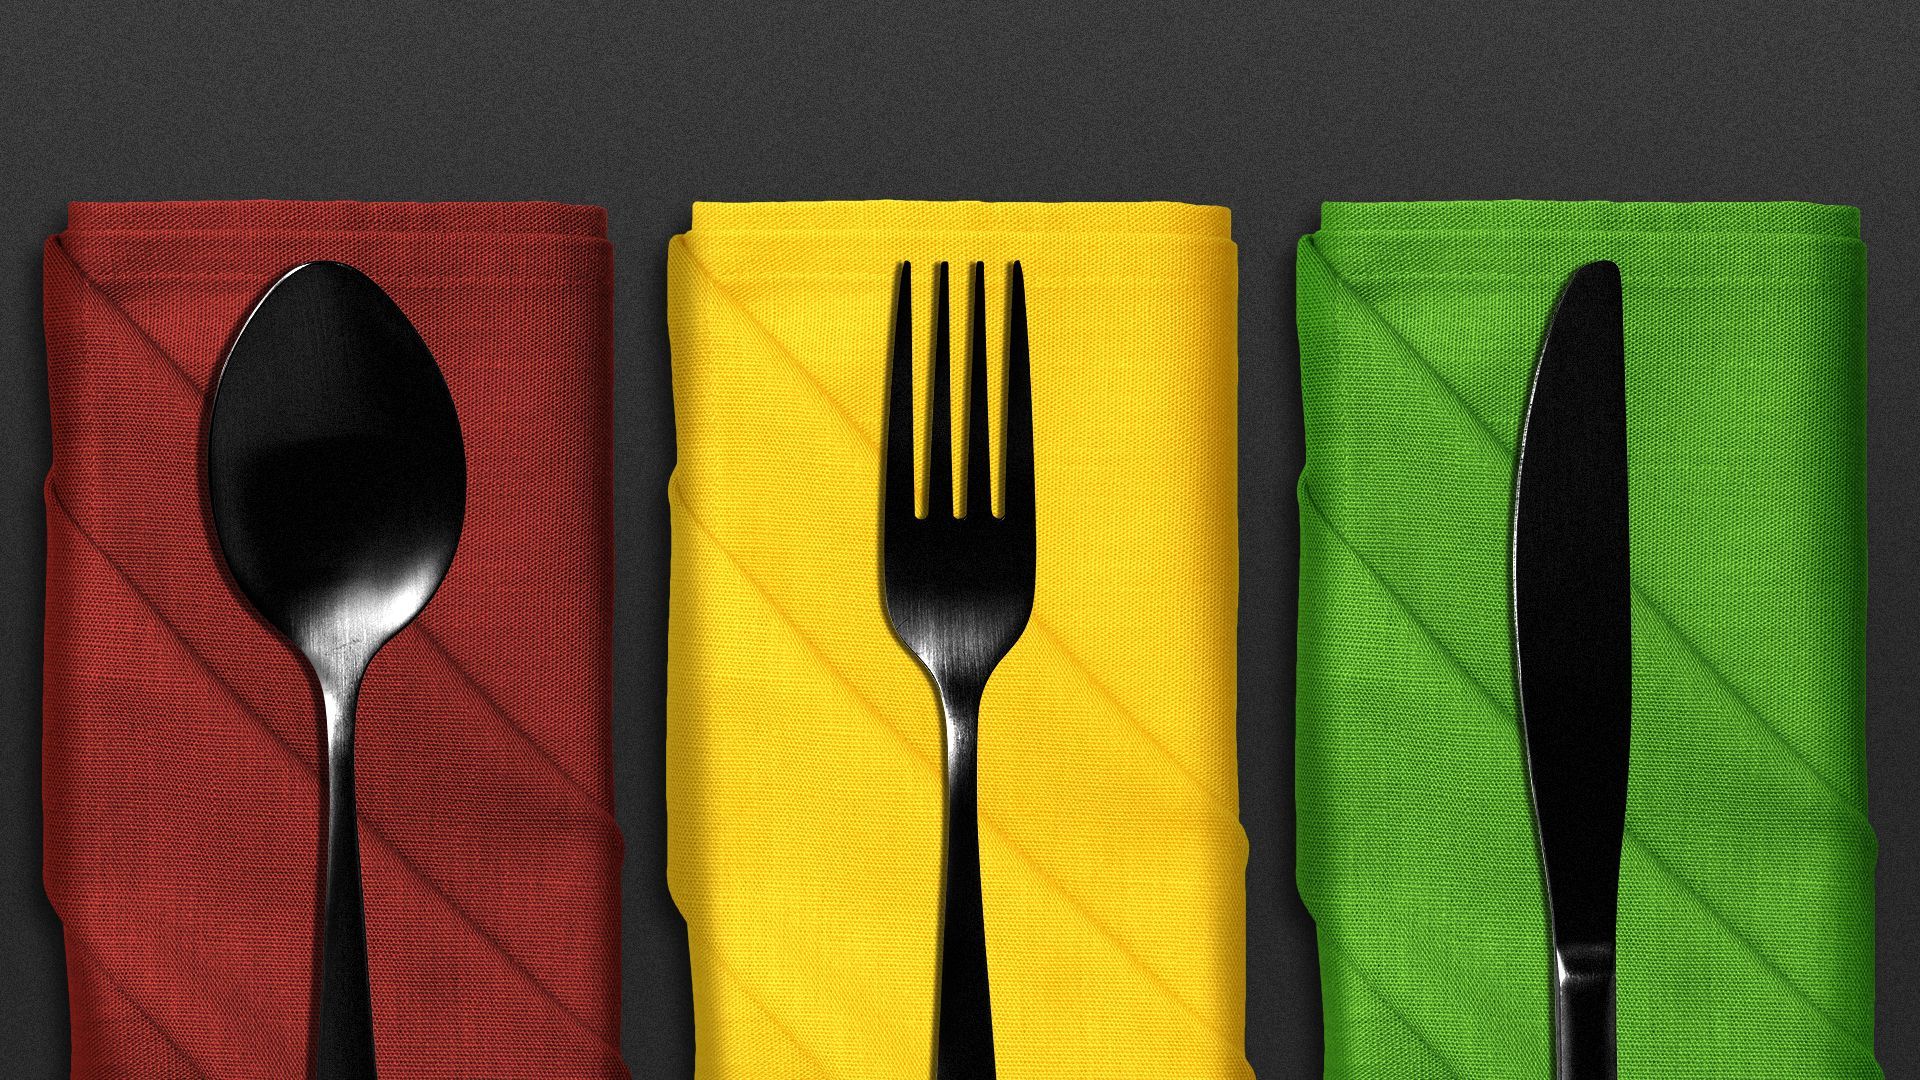 Illustration of silverware on red, yellow and green napkins.